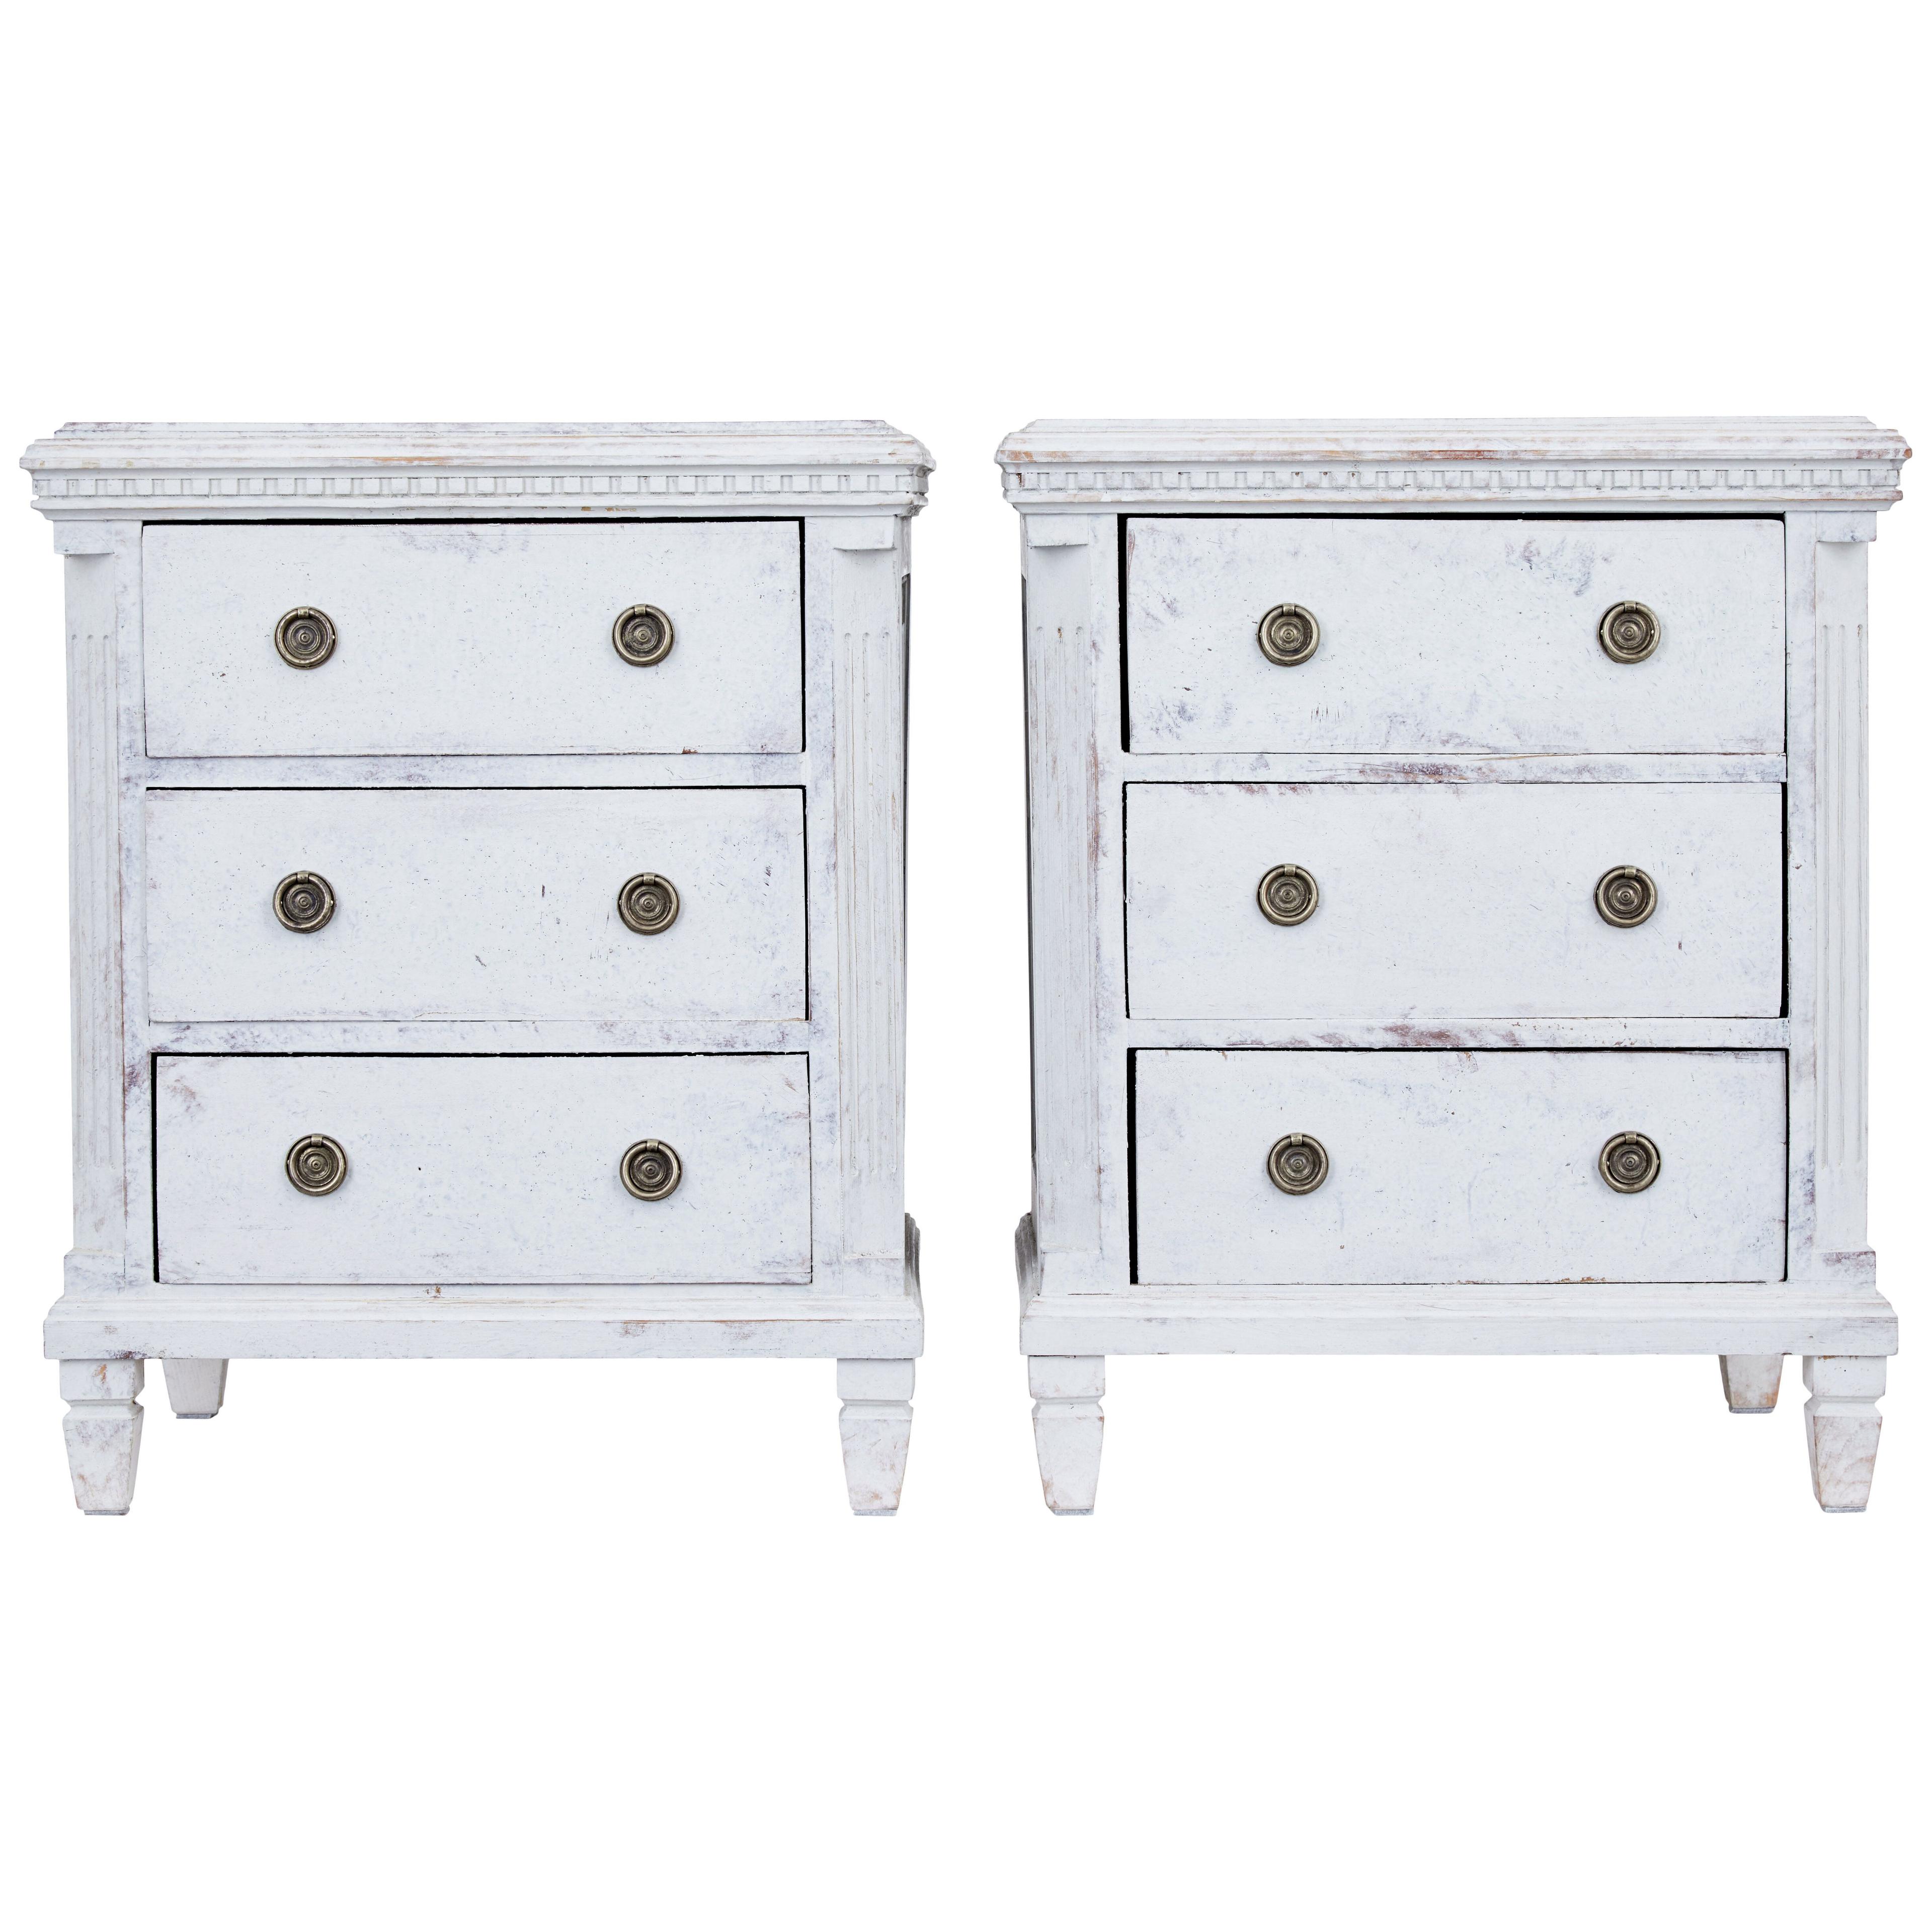 SMALL PAIR OF 19TH CENTURY PAINTED COMMODES